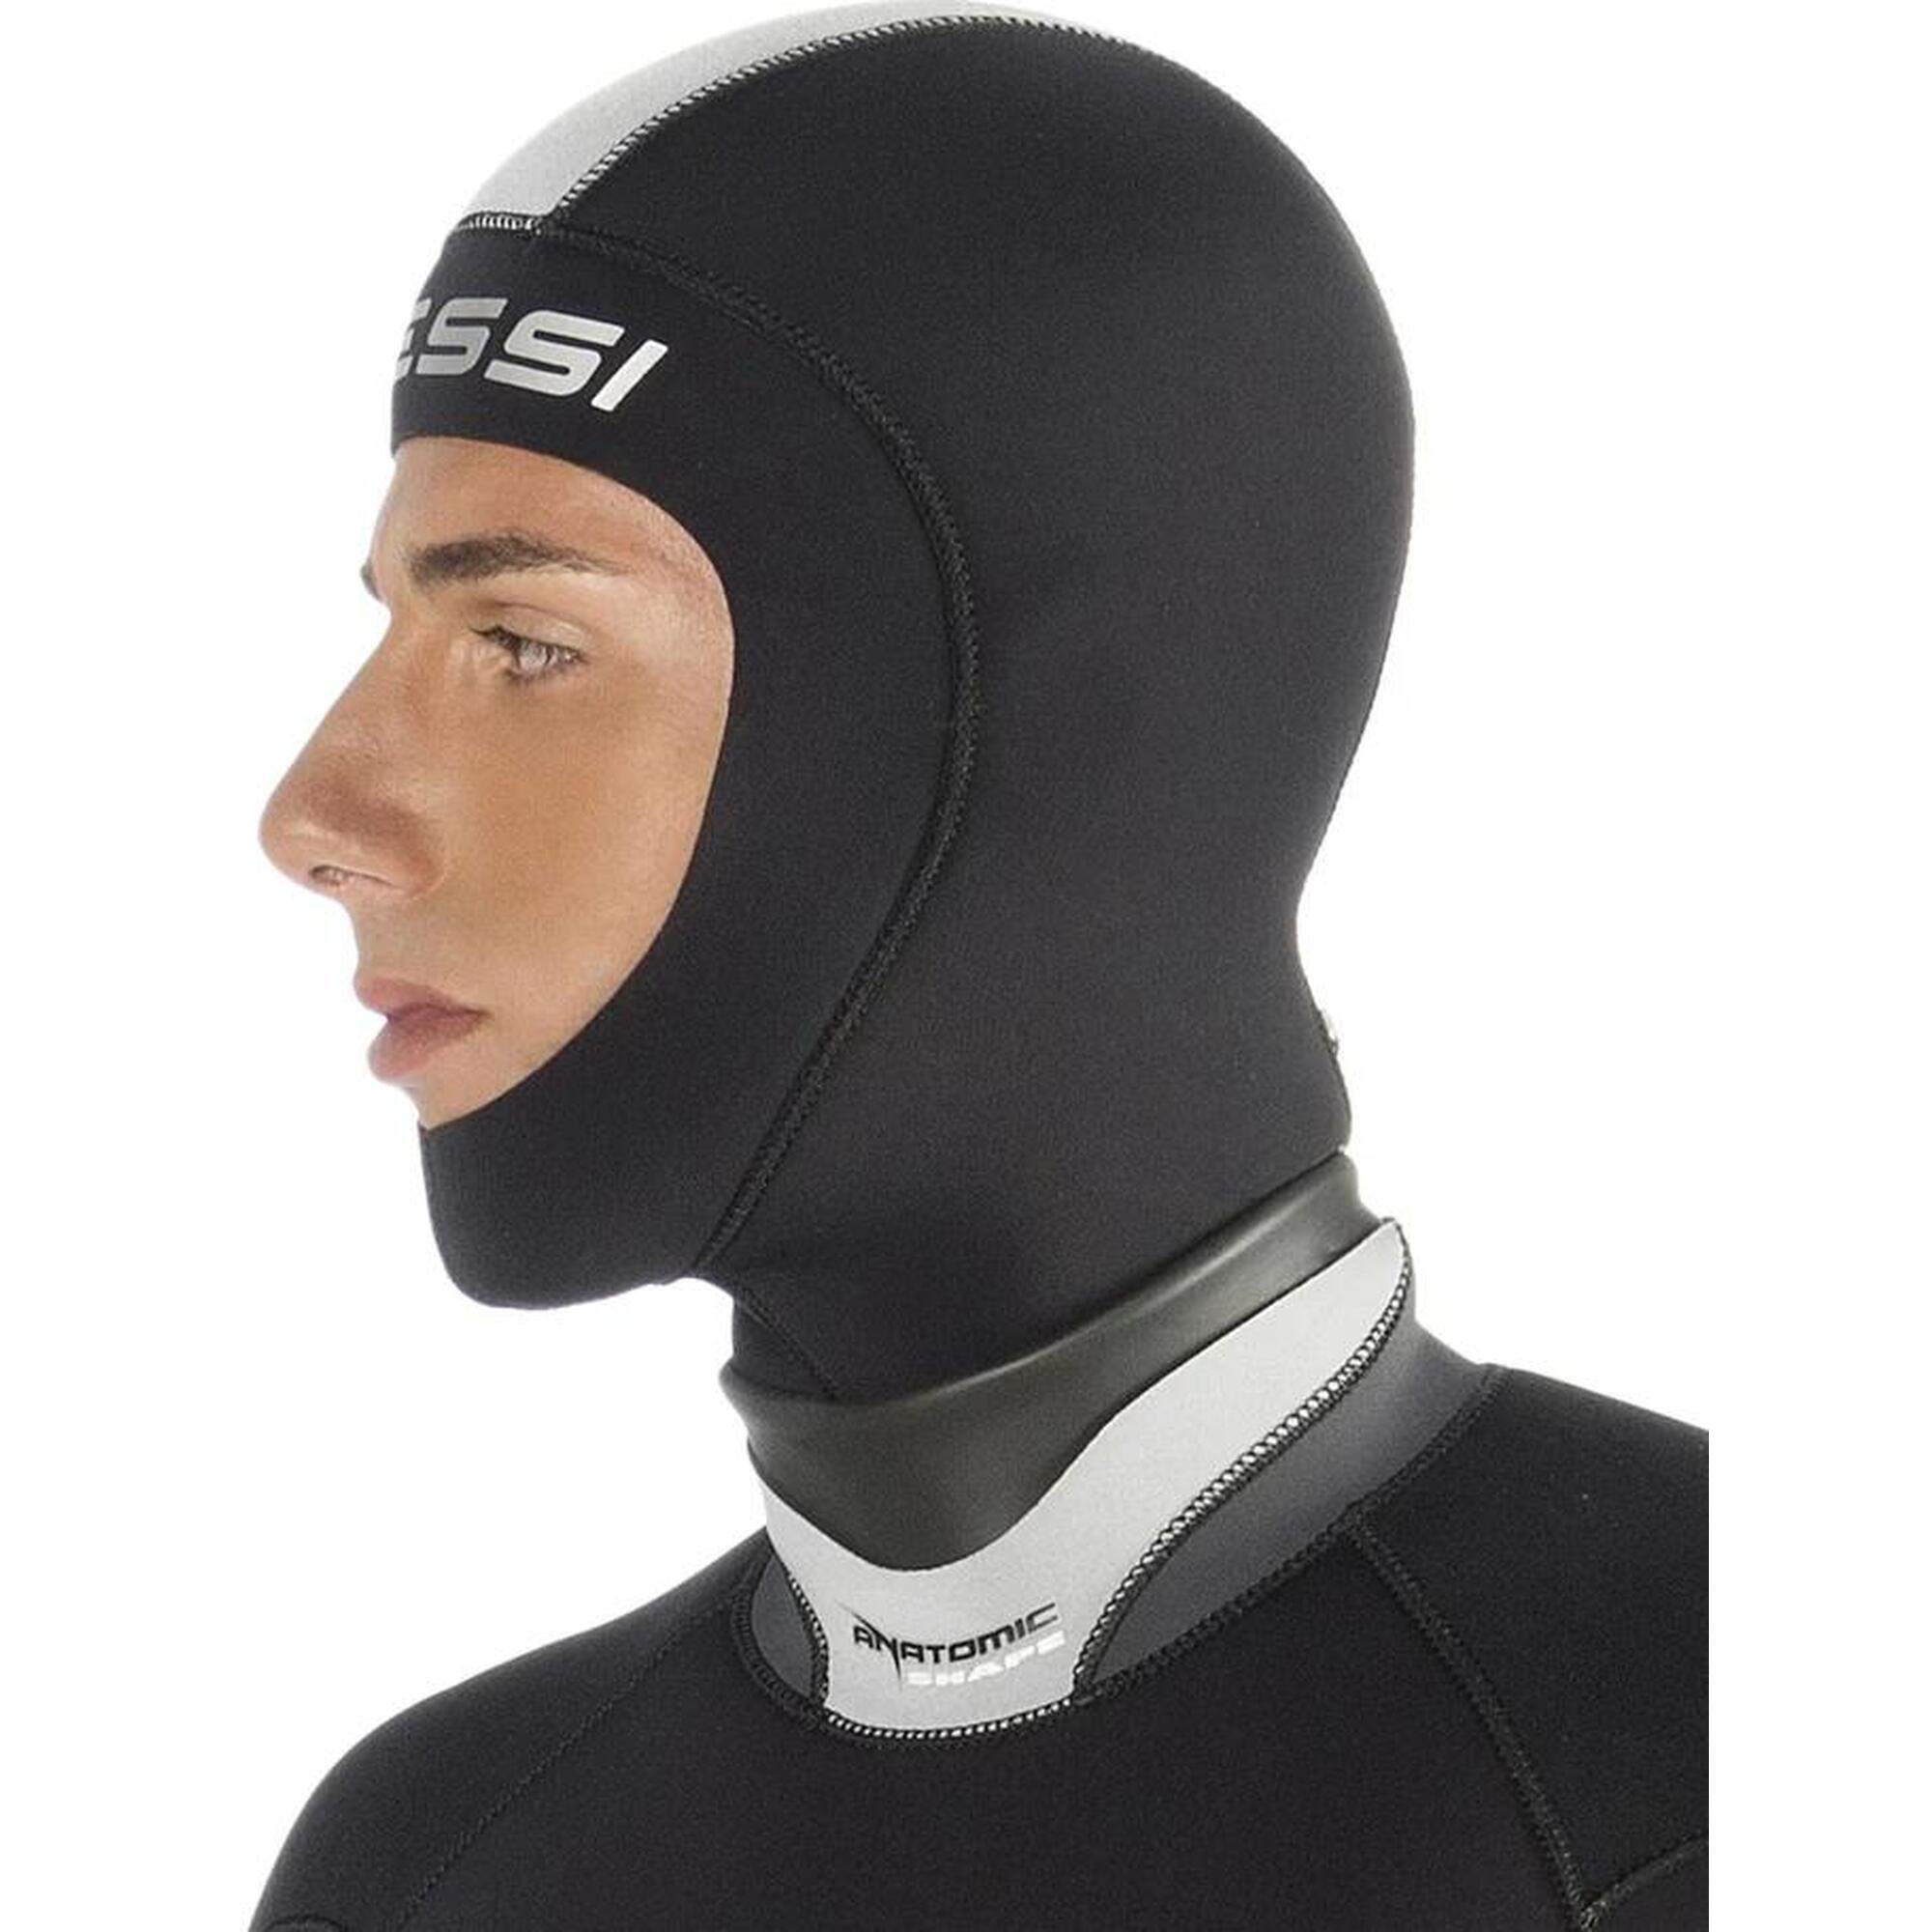 Hood Plus Men's Wetsuit Hood With Safety Snap Hook